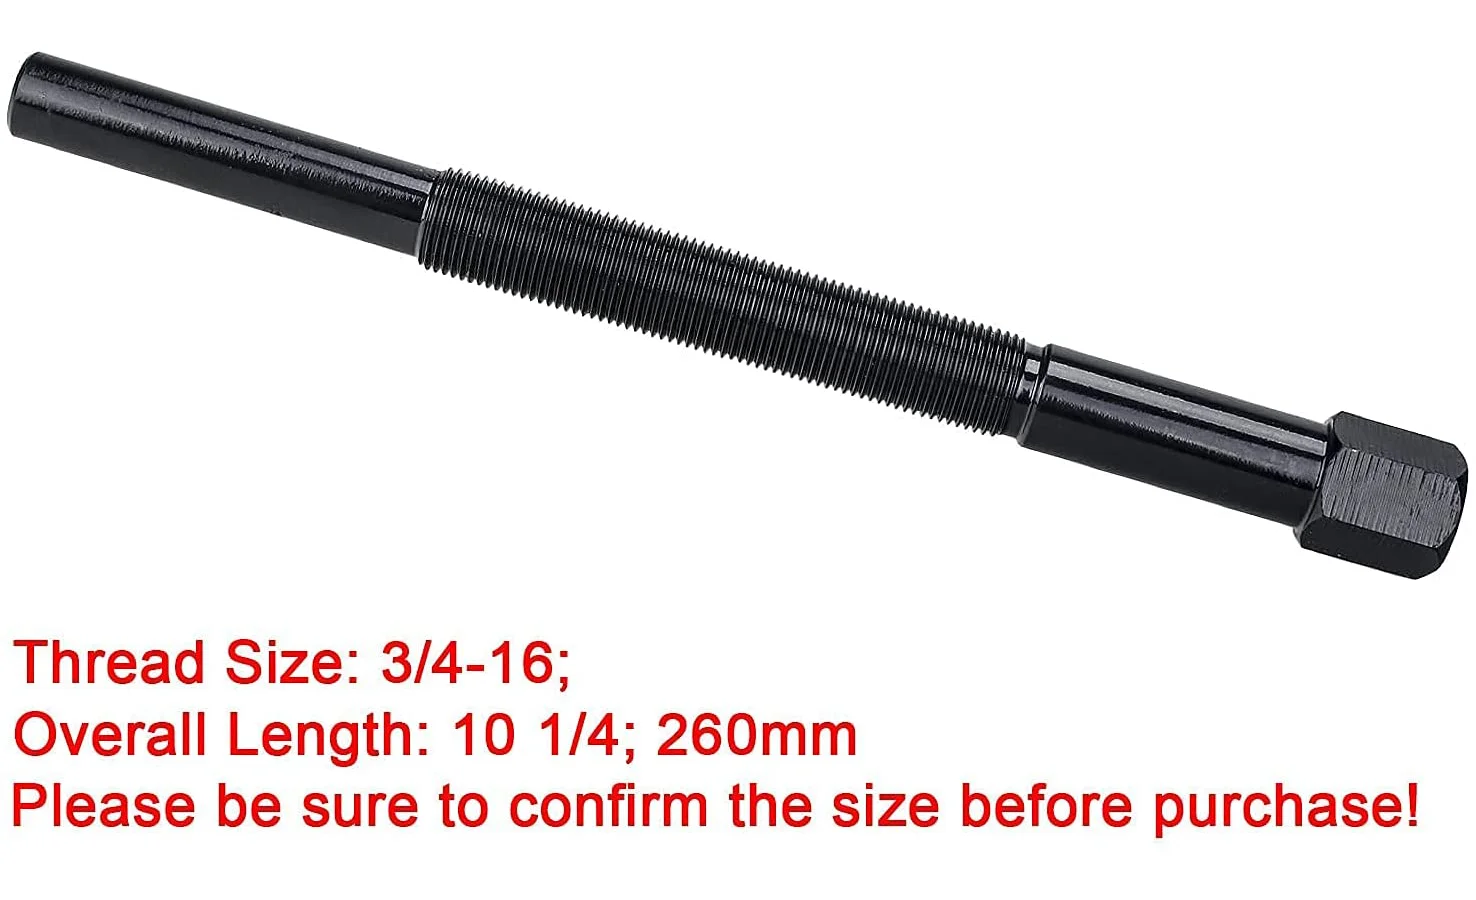 All-new UTV Main Drive Clutch pull Tool Heat treated Quality Steel Durable Clutch remover compatible with most Polaris models 19 td48 th34 clutch kit gear for th43 th48 td048h td048j replacement spare tool parts convenient durable